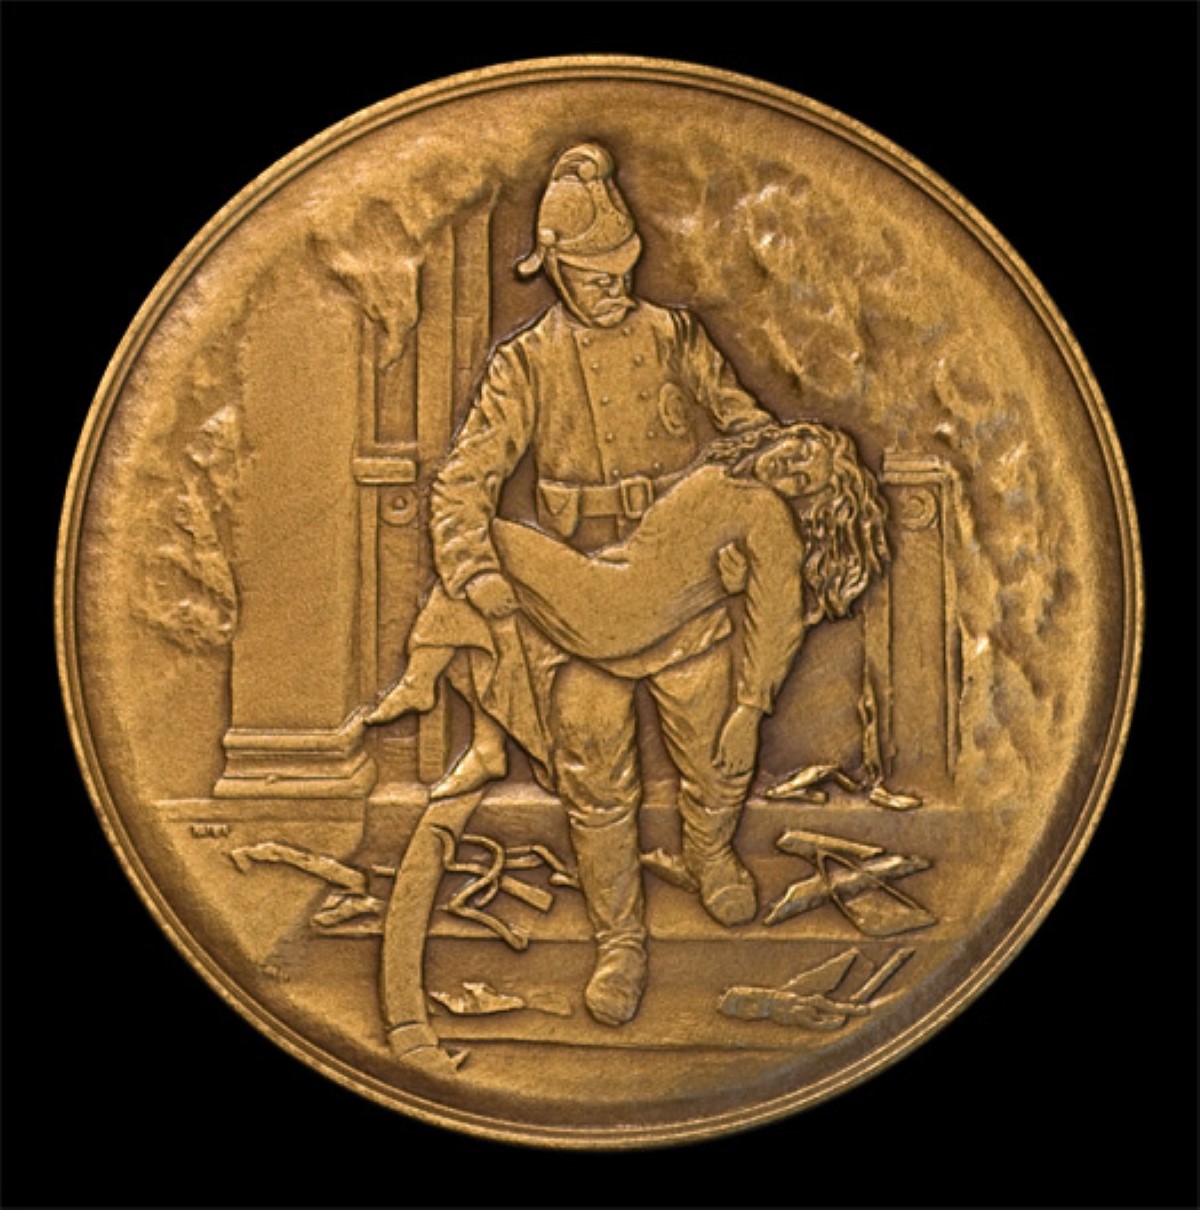 obverse of a coin depicting a fireman carrying a female occupant from a house fire